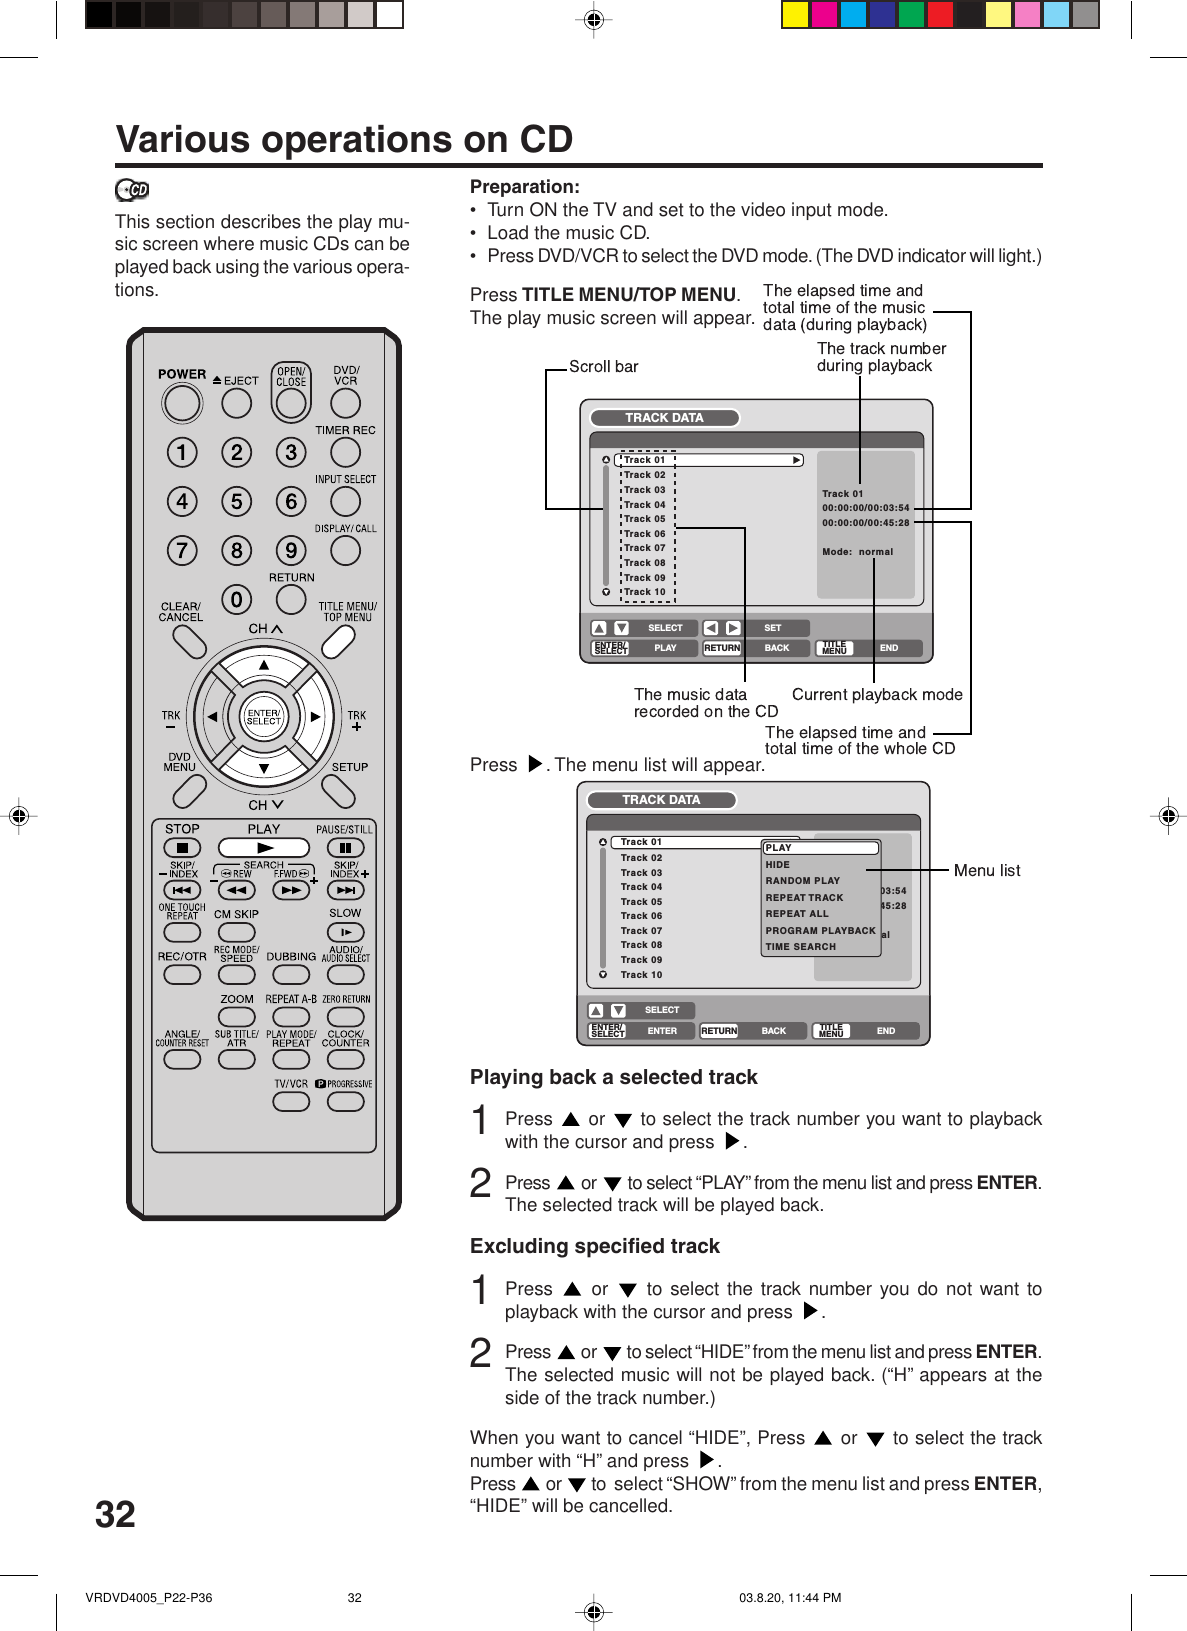 32Various operations on CDPreparation:•Turn ON the TV and set to the video input mode.•Load the music CD.•Press DVD/VCR to select the DVD mode. (The DVD indicator will light.)Press TITLE MENU/TOP MENU.The play music screen will appear.This section describes the play mu-sic screen where music CDs can beplayed back using the various opera-tions.Track 02Track 03Track 04Track 05Track 06Track 07Track 08Track 09Track 10Track 01Track 0100:00:00/00:03:5400:00:00/00:45:28Mode:  normalTRACK DATAENTER/SELECT RETURNPLAY BACK ENDSELECT SETTITLEMENUTrack 02Track 03Track 04Track 05Track 06Track 07Track 08Track 09Track 10Track 01Track 0100:00:00/00:03:5400:00:00/00:45:28Mode:  normalTRACK DATAENTER/SELECTRETURNENTER BACK ENDSELECTTITLEMENUPLAYHIDERANDOM PLAYREPEAT TRACKREPEAT ALLPROGRAM PLAYBACKTIME SEARCHPLAYPress  . The menu list will appear.Playing back a selected track1Press   or   to select the track number you want to playbackwith the cursor and press  .2Press   or   to select “PLAY” from the menu list and press ENTER.The selected track will be played back.Excluding specified track1Press   or   to select the track number you do not want toplayback with the cursor and press  .2Press   or   to select “HIDE” from the menu list and press ENTER.The selected music will not be played back. (“H” appears at theside of the track number.)When you want to cancel “HIDE”, Press   or   to select the tracknumber with “H” and press  .Press   or   to  select “SHOW” from the menu list and press ENTER,“HIDE” will be cancelled.VRDVD4005_P22-P36 03.8.20, 11:44 PM32